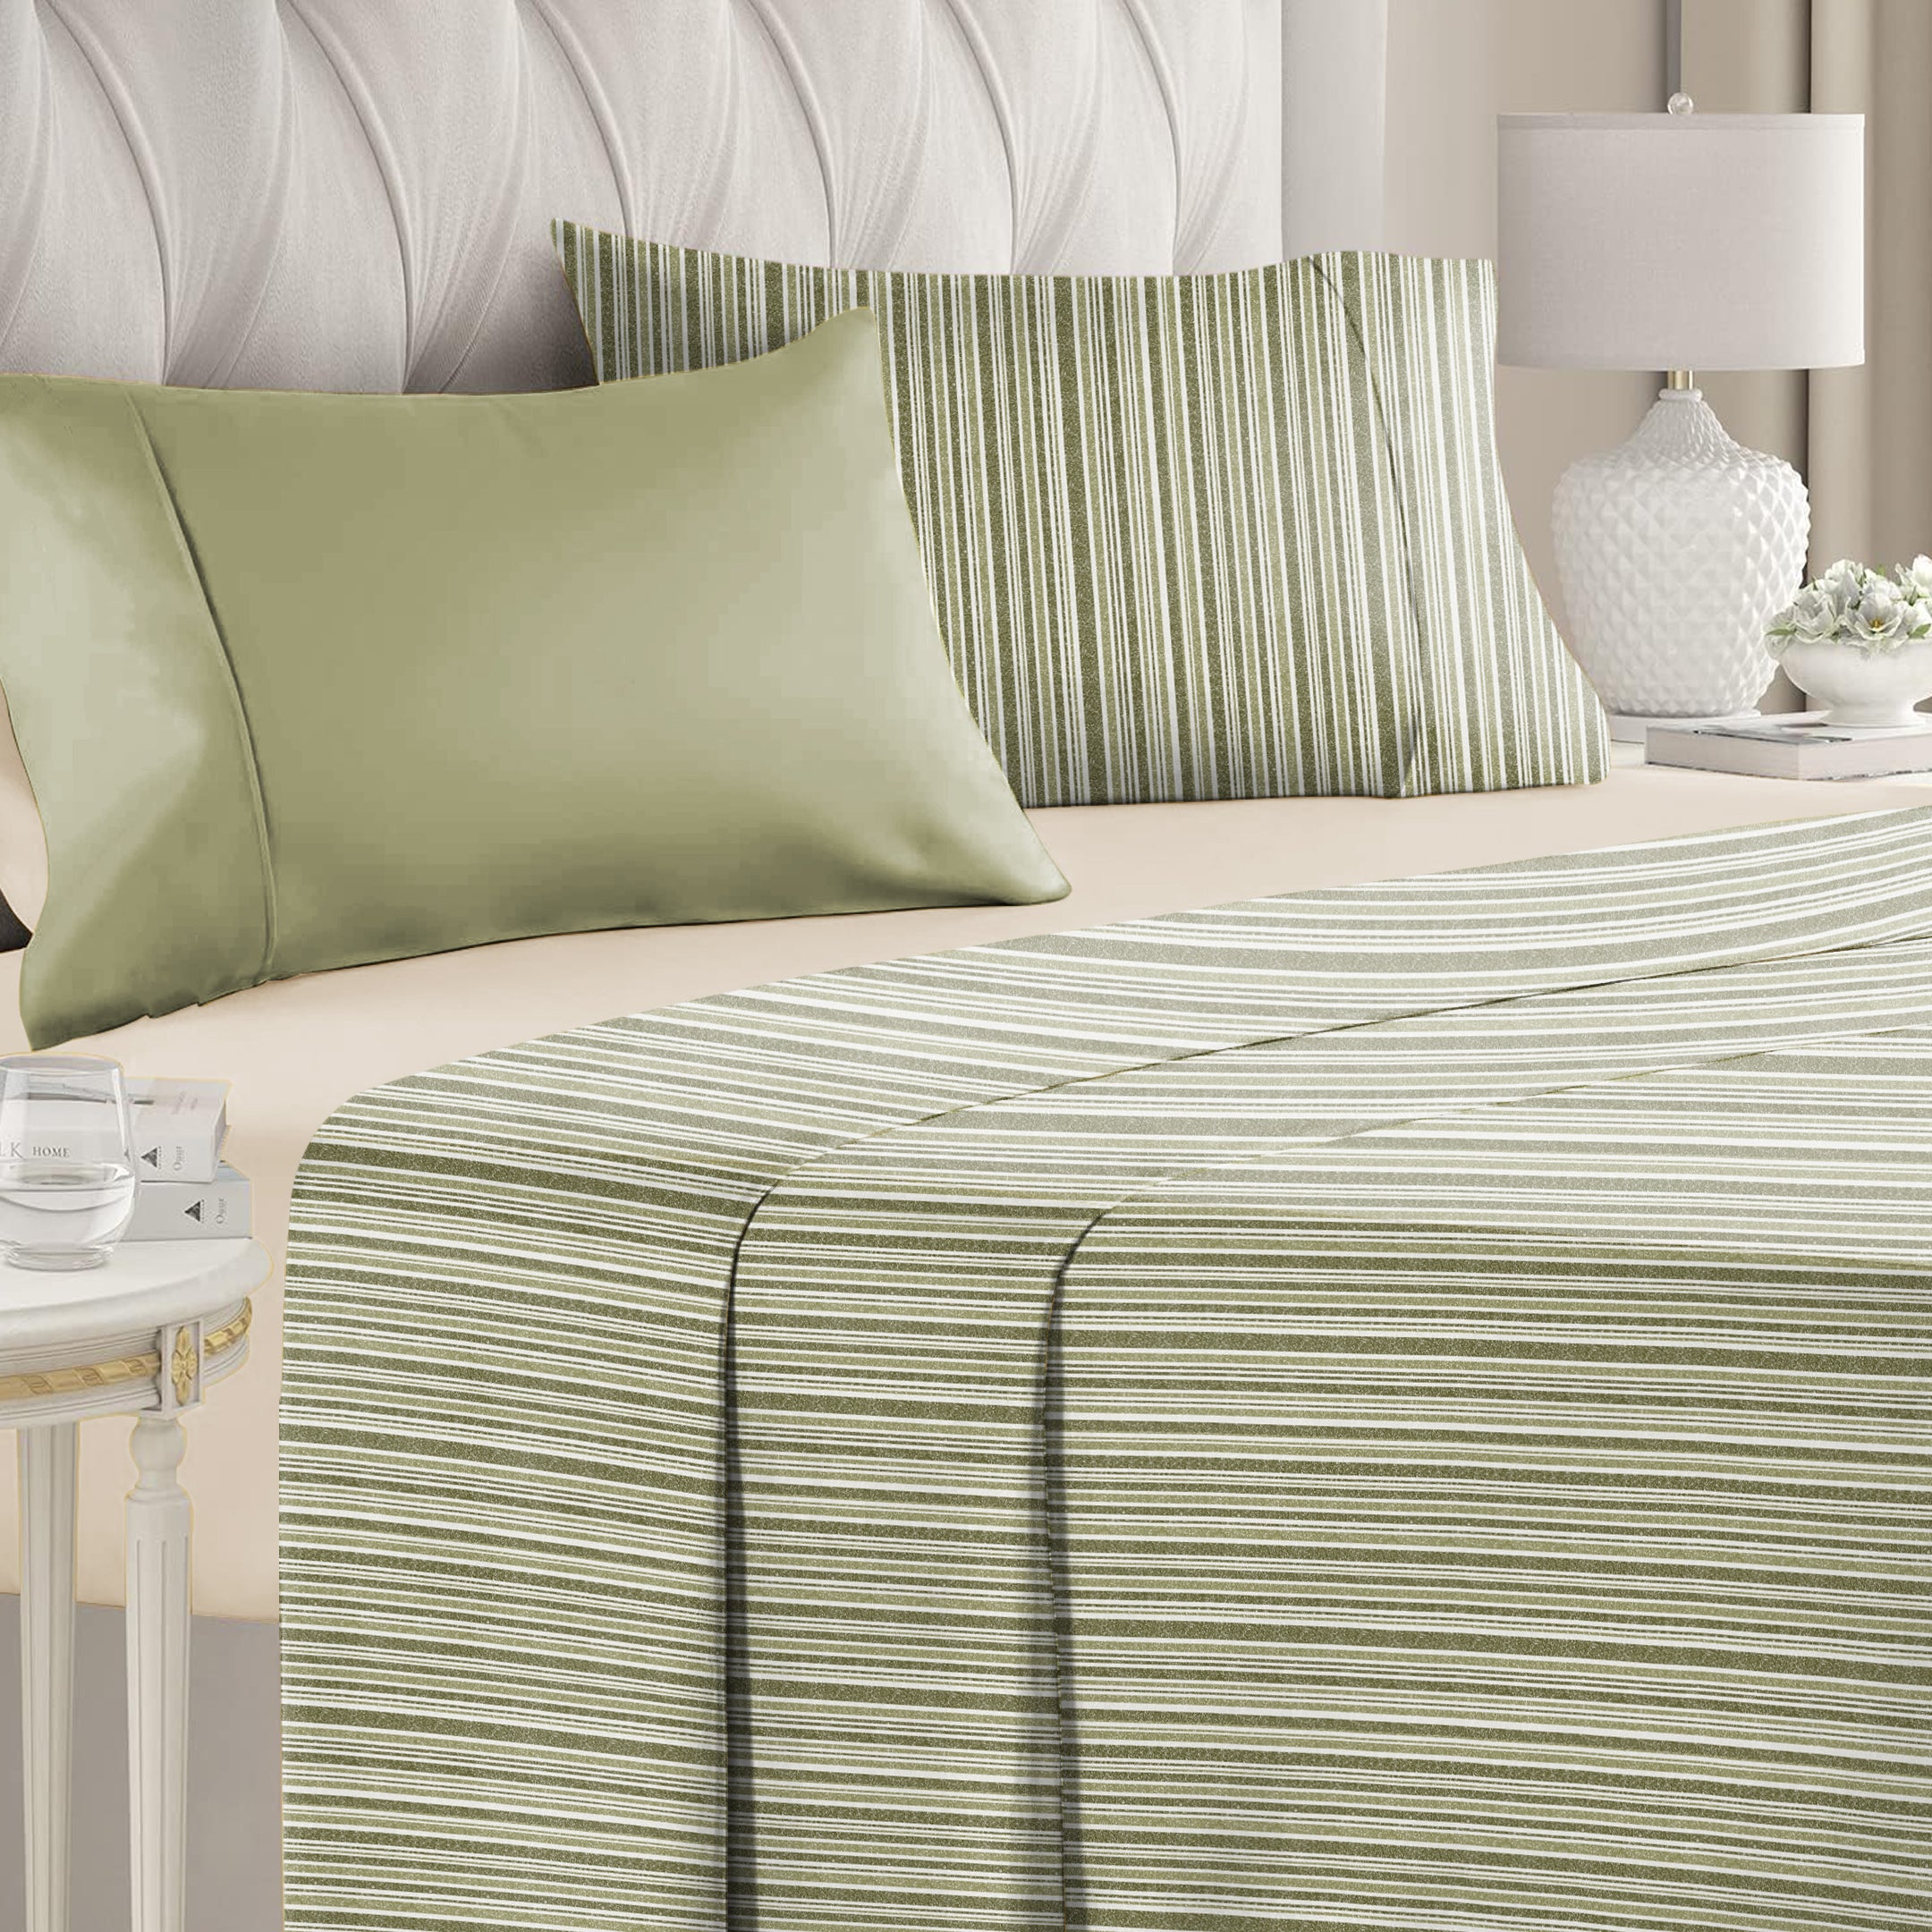 Jodhpur Stripe Bedsheet For Double Bed With 2 PillowCovers King Size (104" X 90") Olive